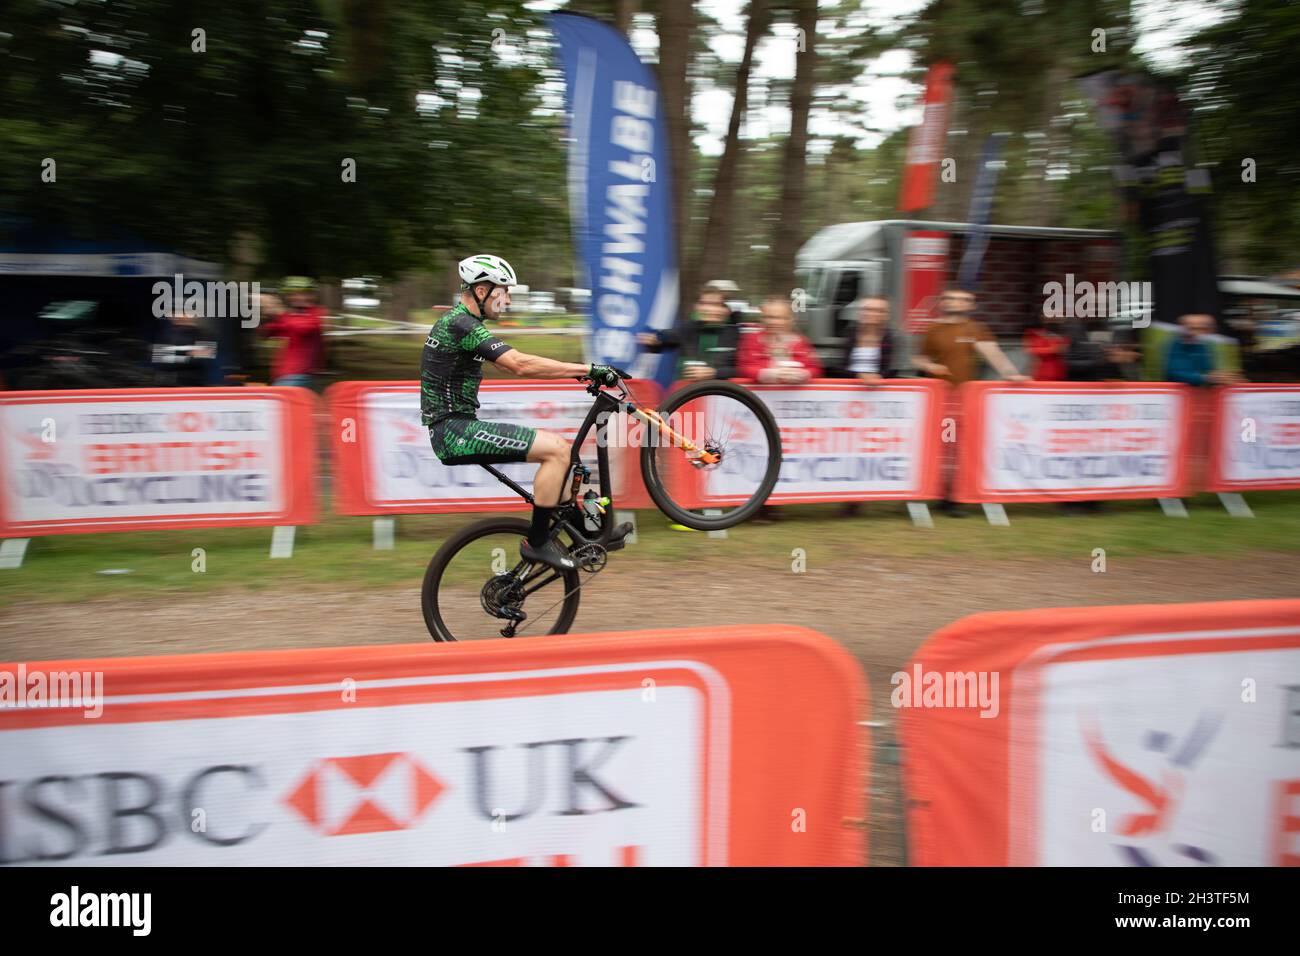 Mountain bike racers in National Points Series RACE, Cannock Chase, Staffordshire, Inghilterra, Regno Unito, GB, Europa. Foto Stock